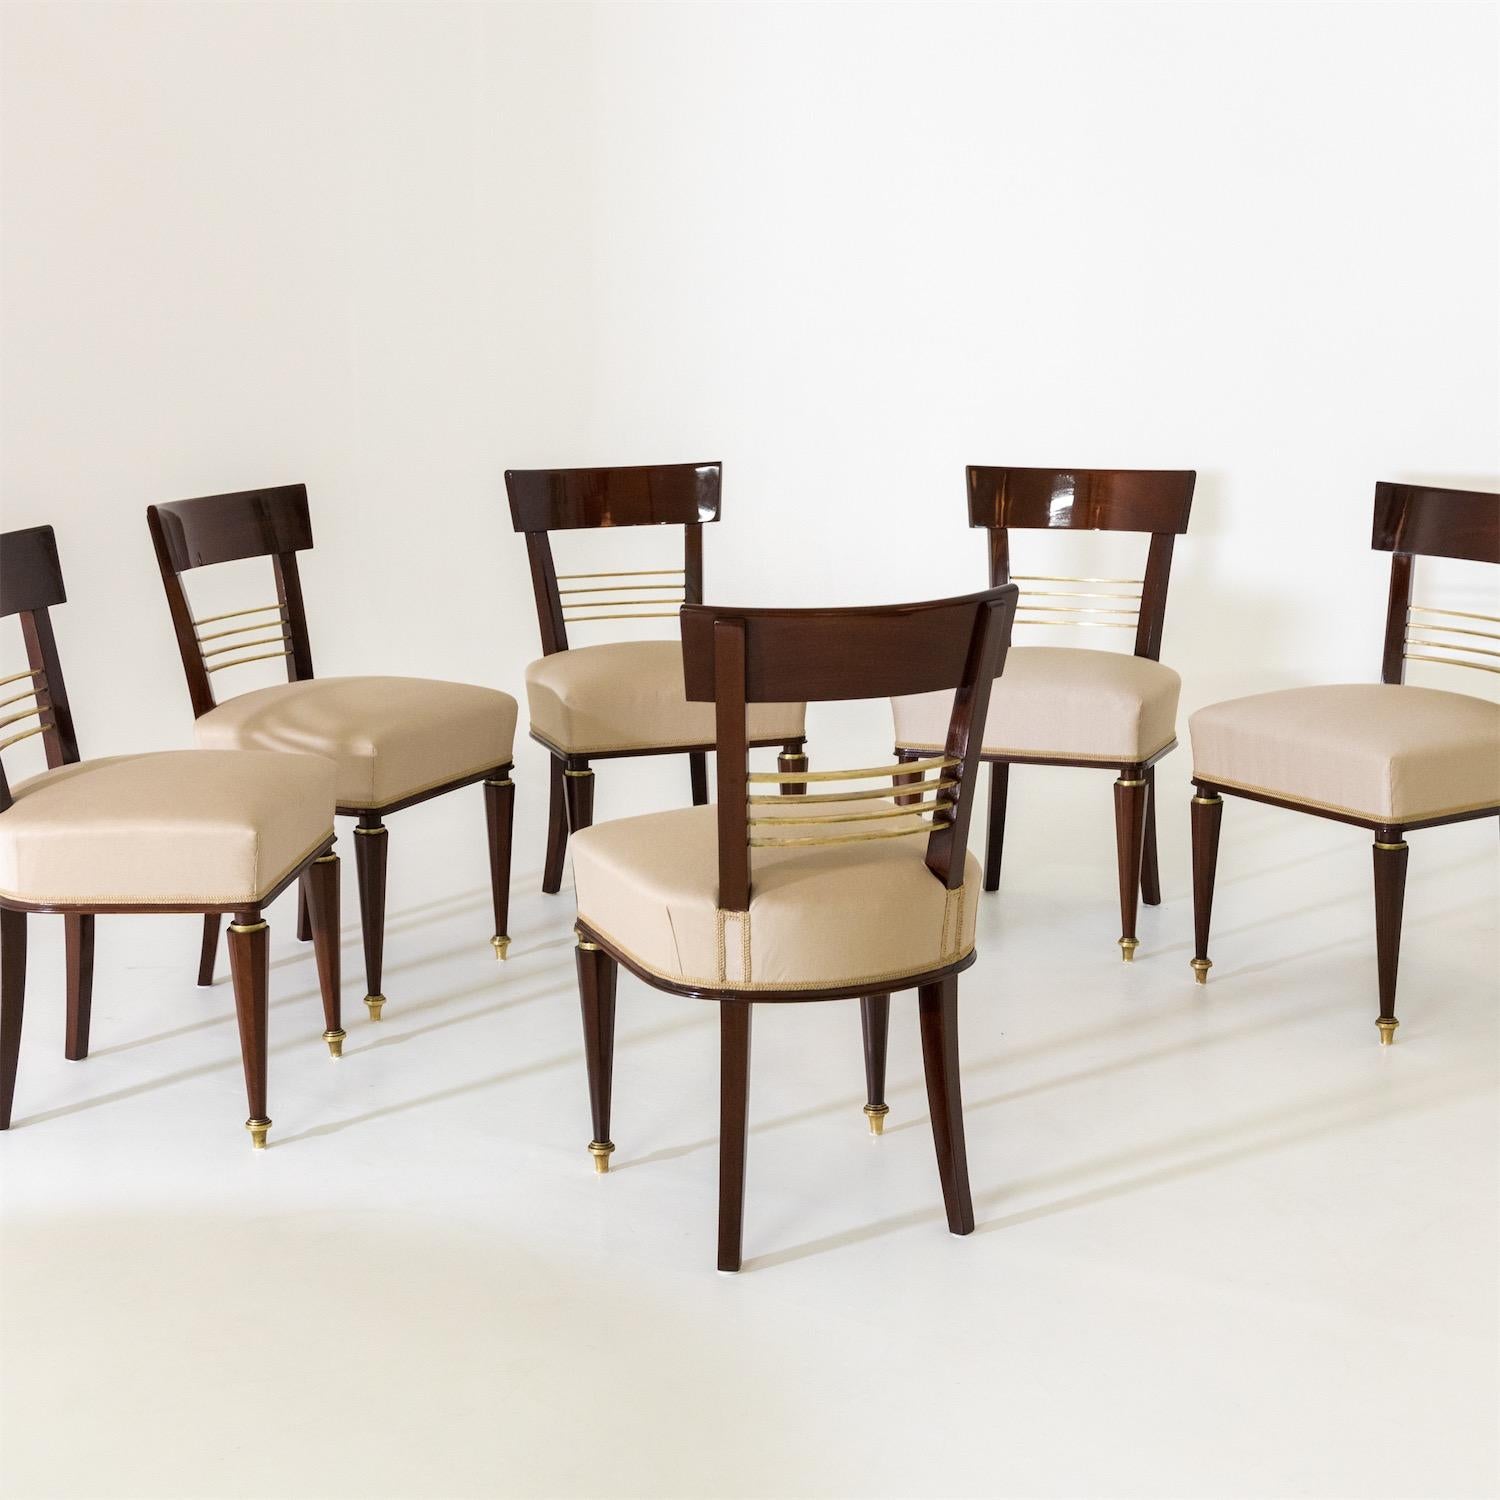 Set of Six Dining Room Chairs, Mid-19th Century 7